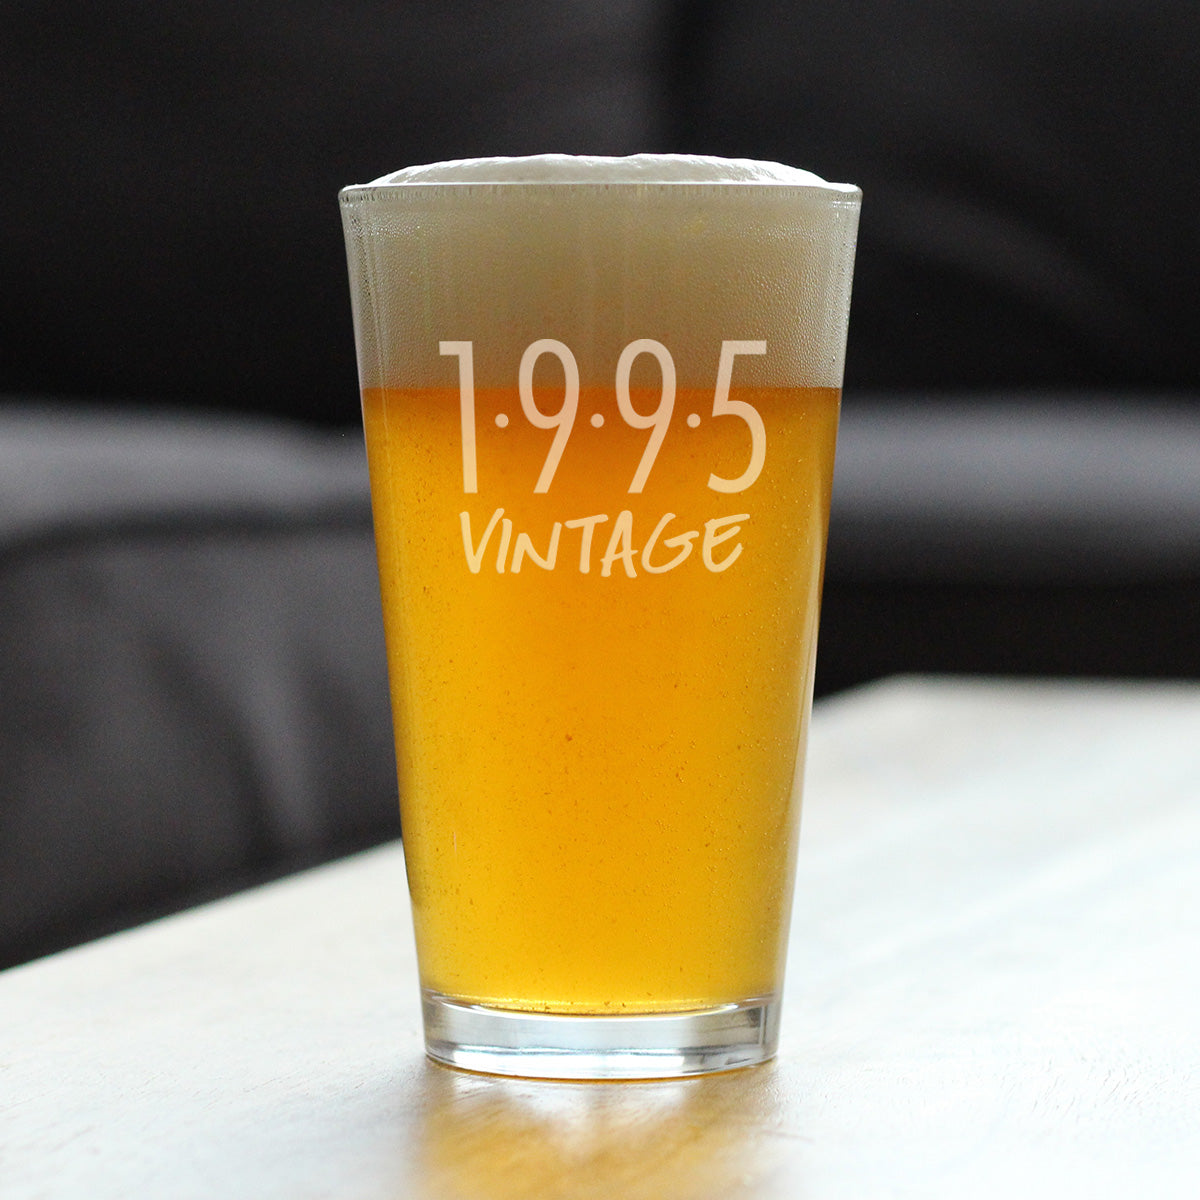 Vintage 1995 - Pint Glass for Beer - 29th Birthday Gifts for Men or Women Turning 29 - Fun Bday Party Decor - 16 oz